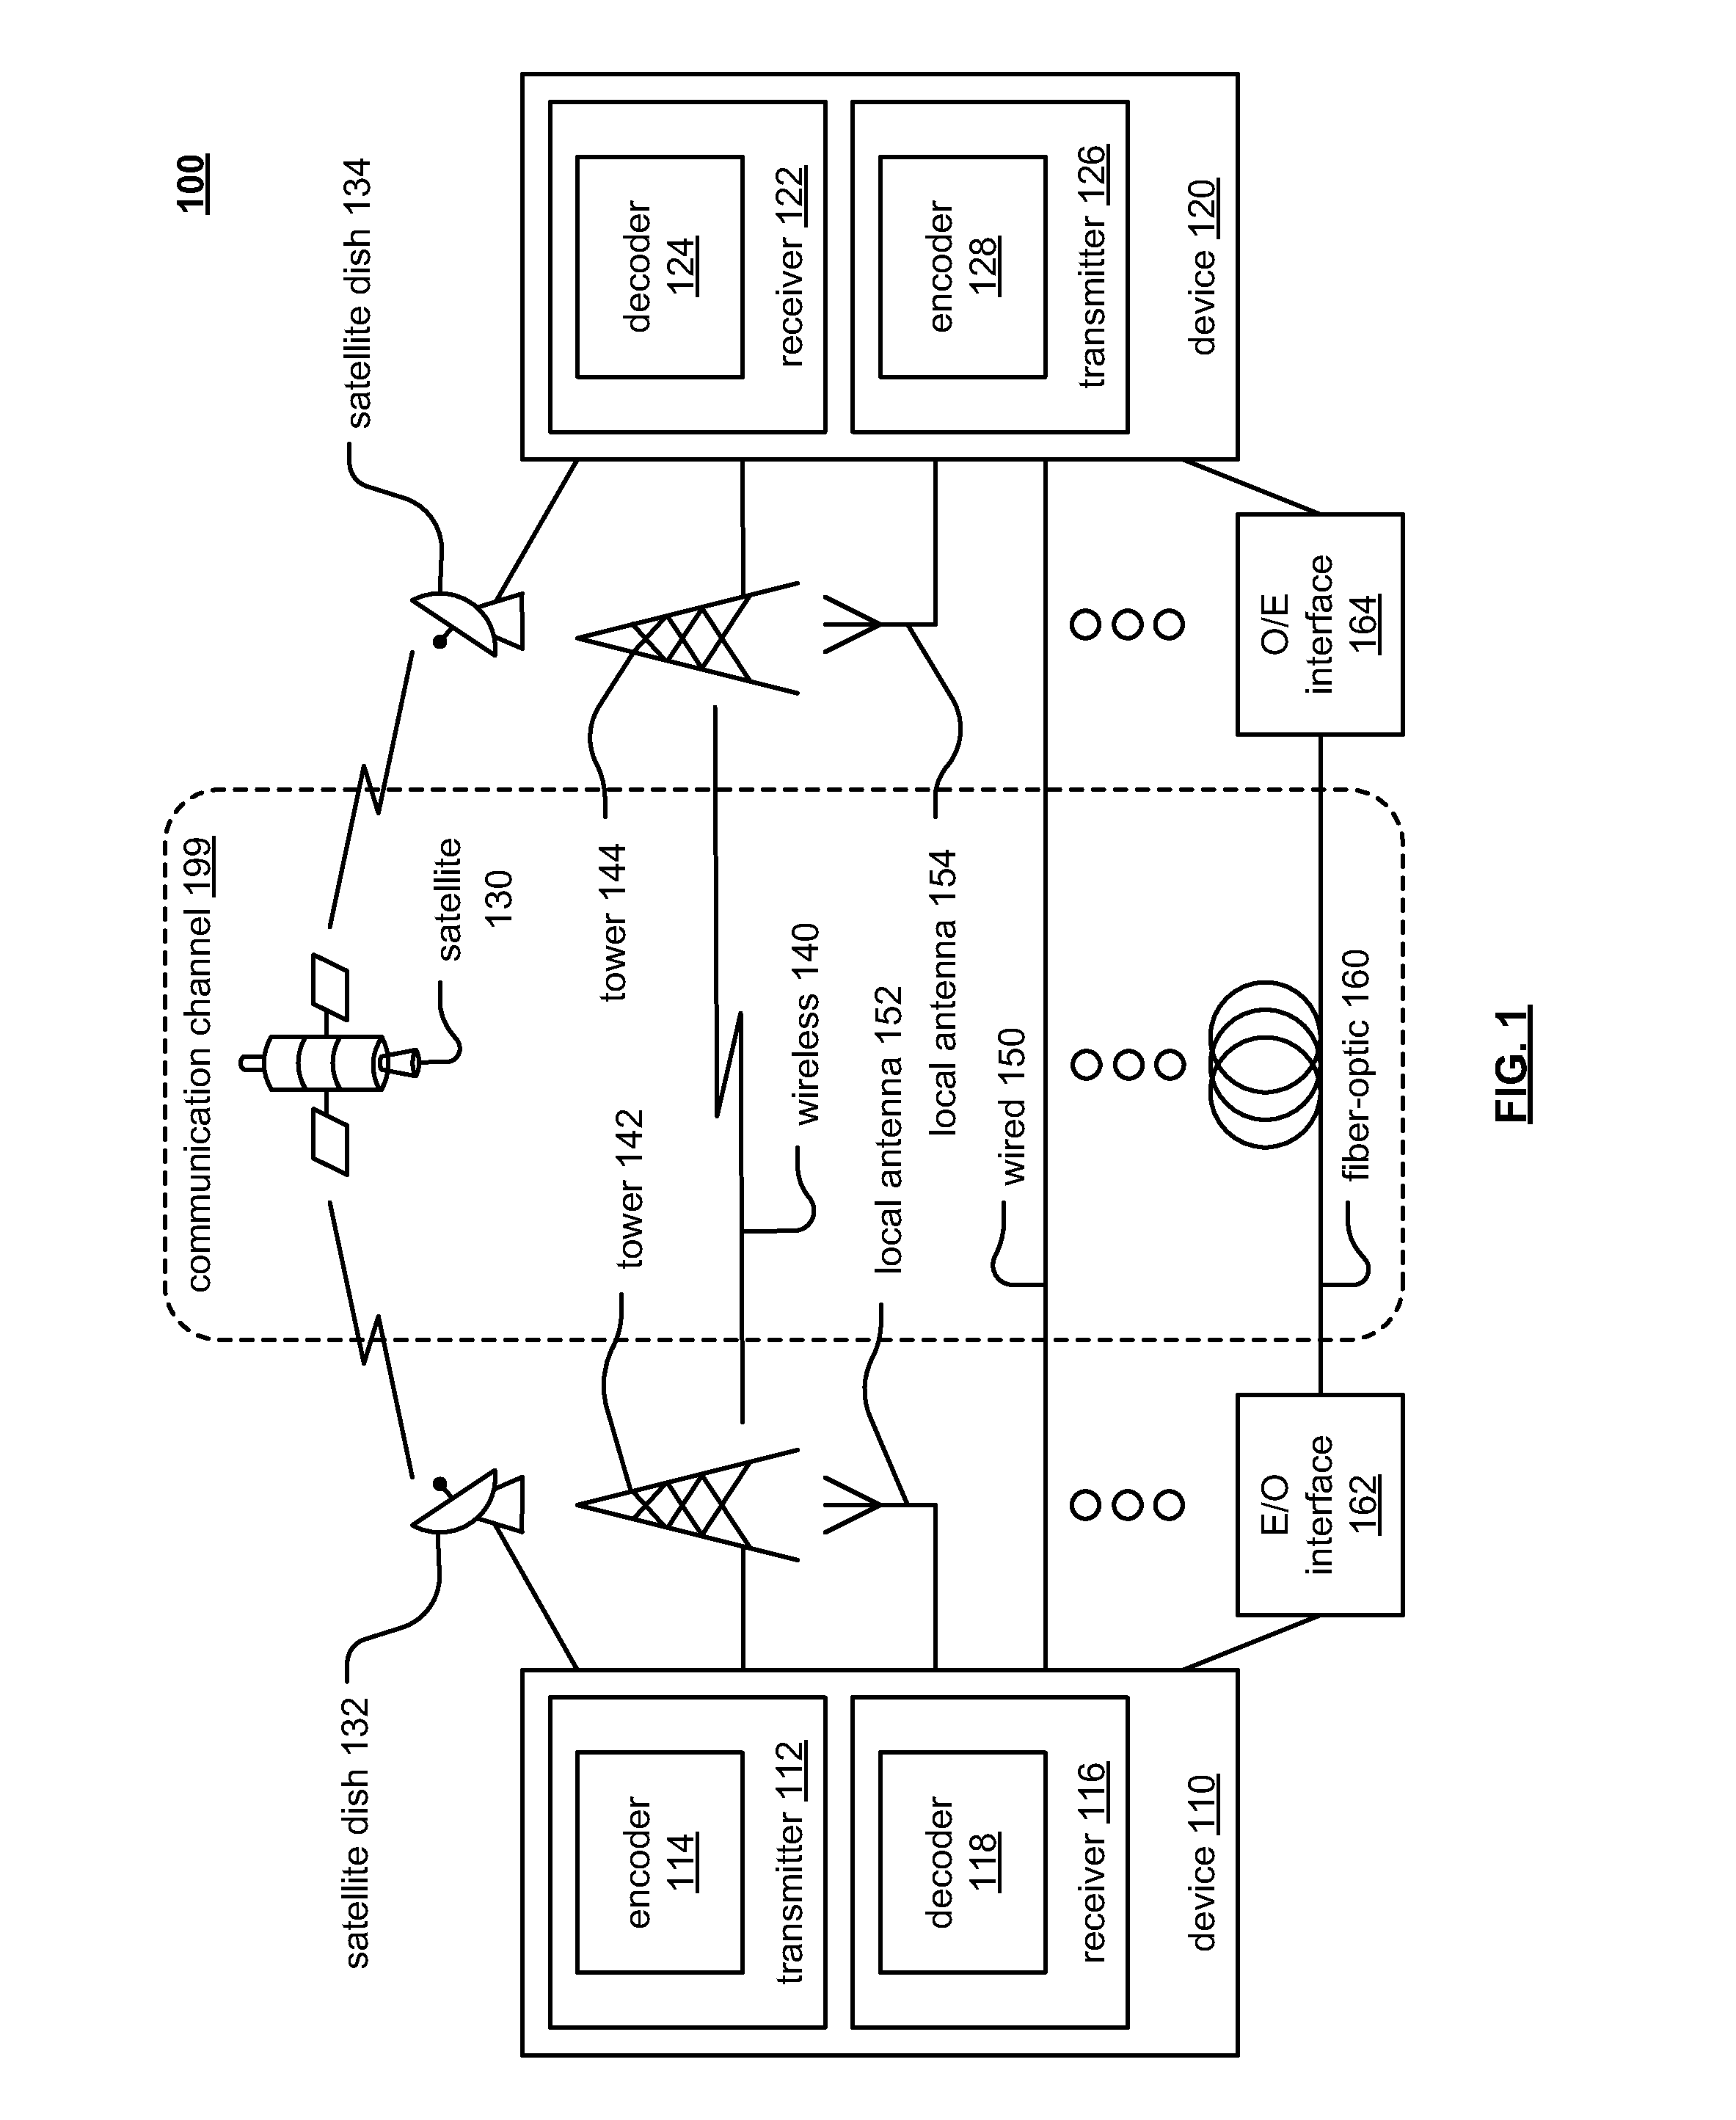 Sample adaptive offset (SAO) in accordance with video coding